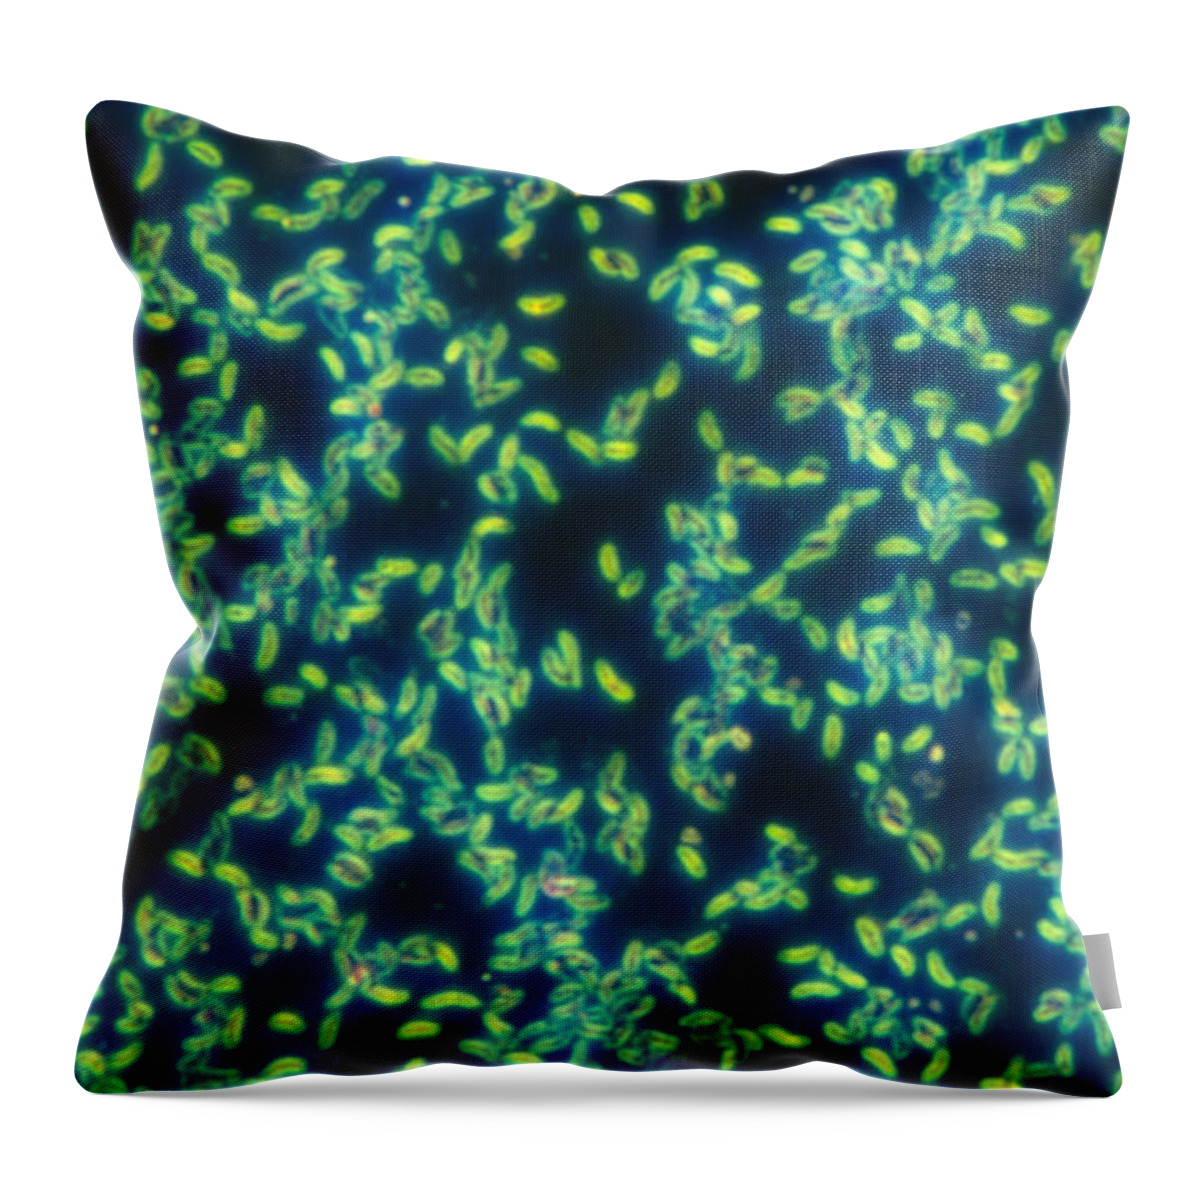 Bacteria Throw Pillow featuring the photograph Vibrio Cholerae, Lm by Michael Abbey